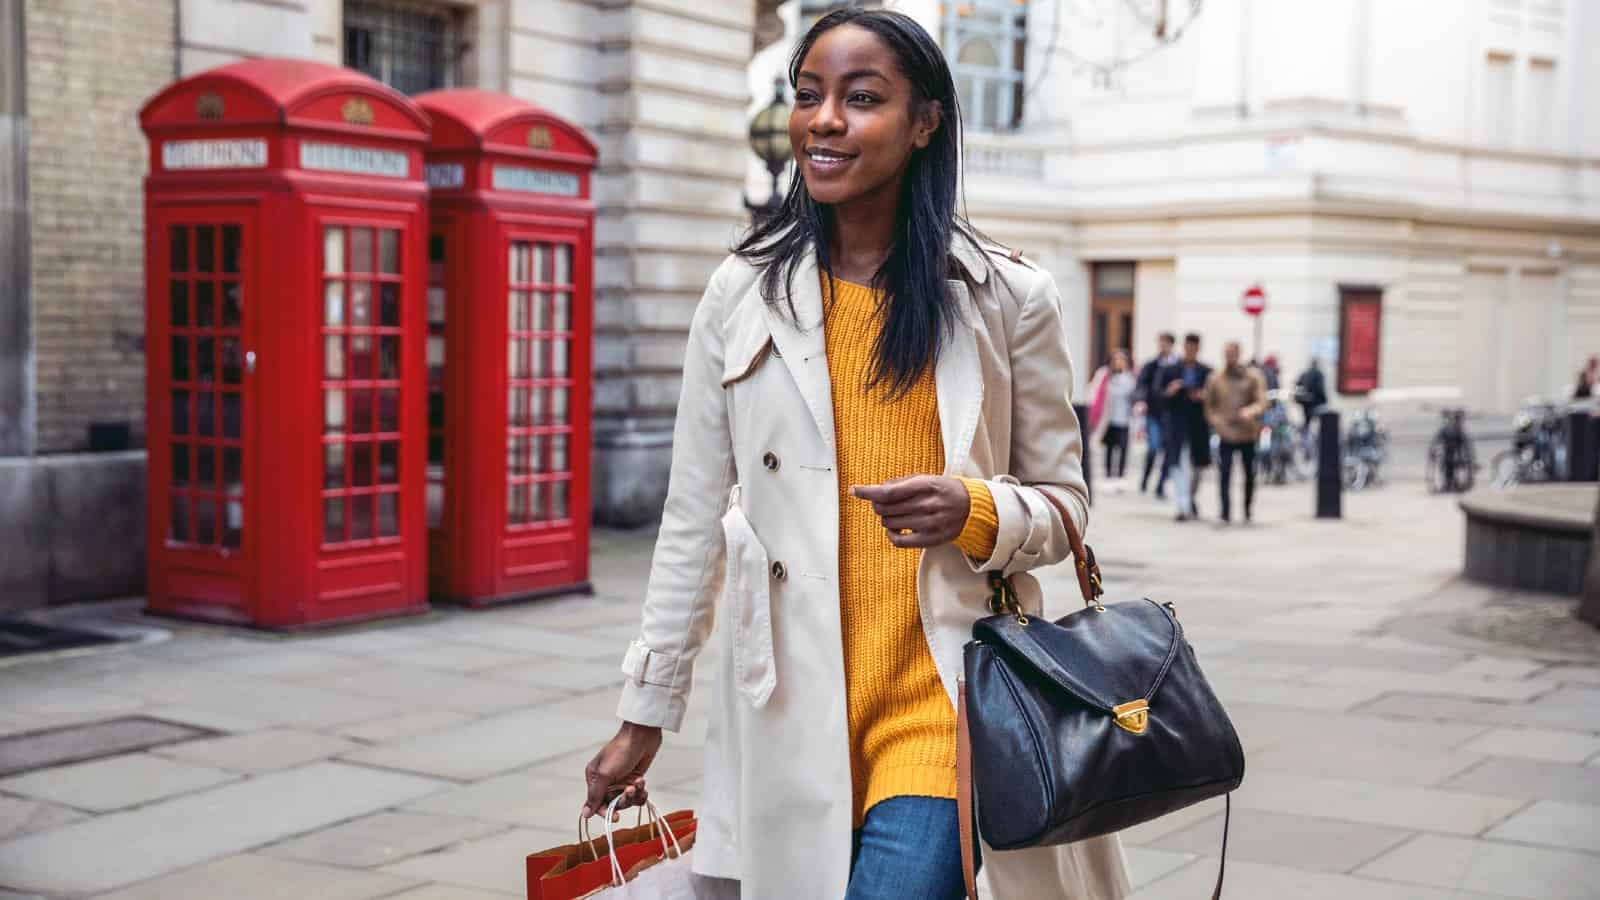 Young black woman walking in Central London for shopping